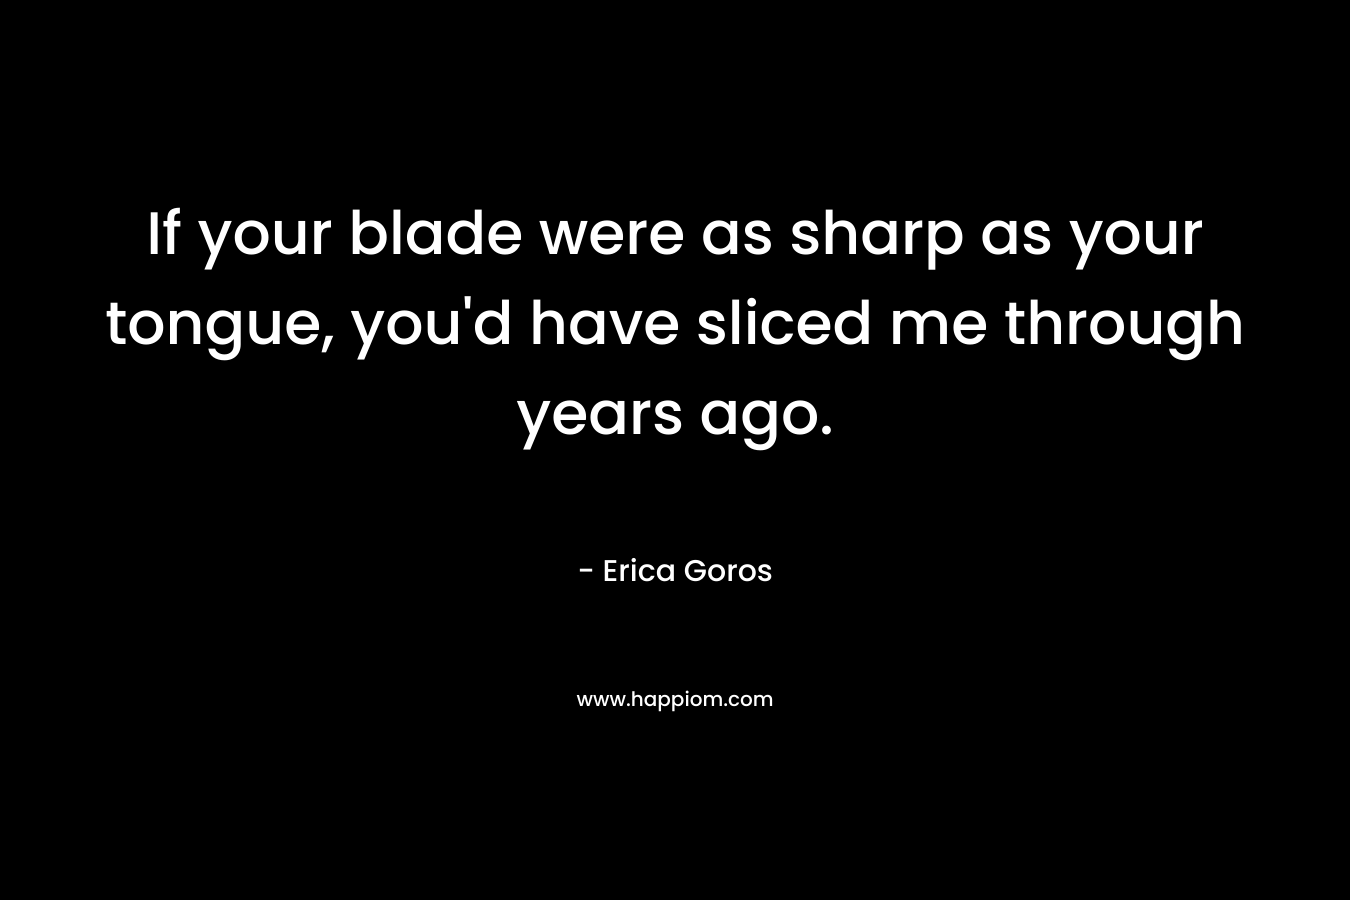 If your blade were as sharp as your tongue, you’d have sliced me through years ago. – Erica Goros